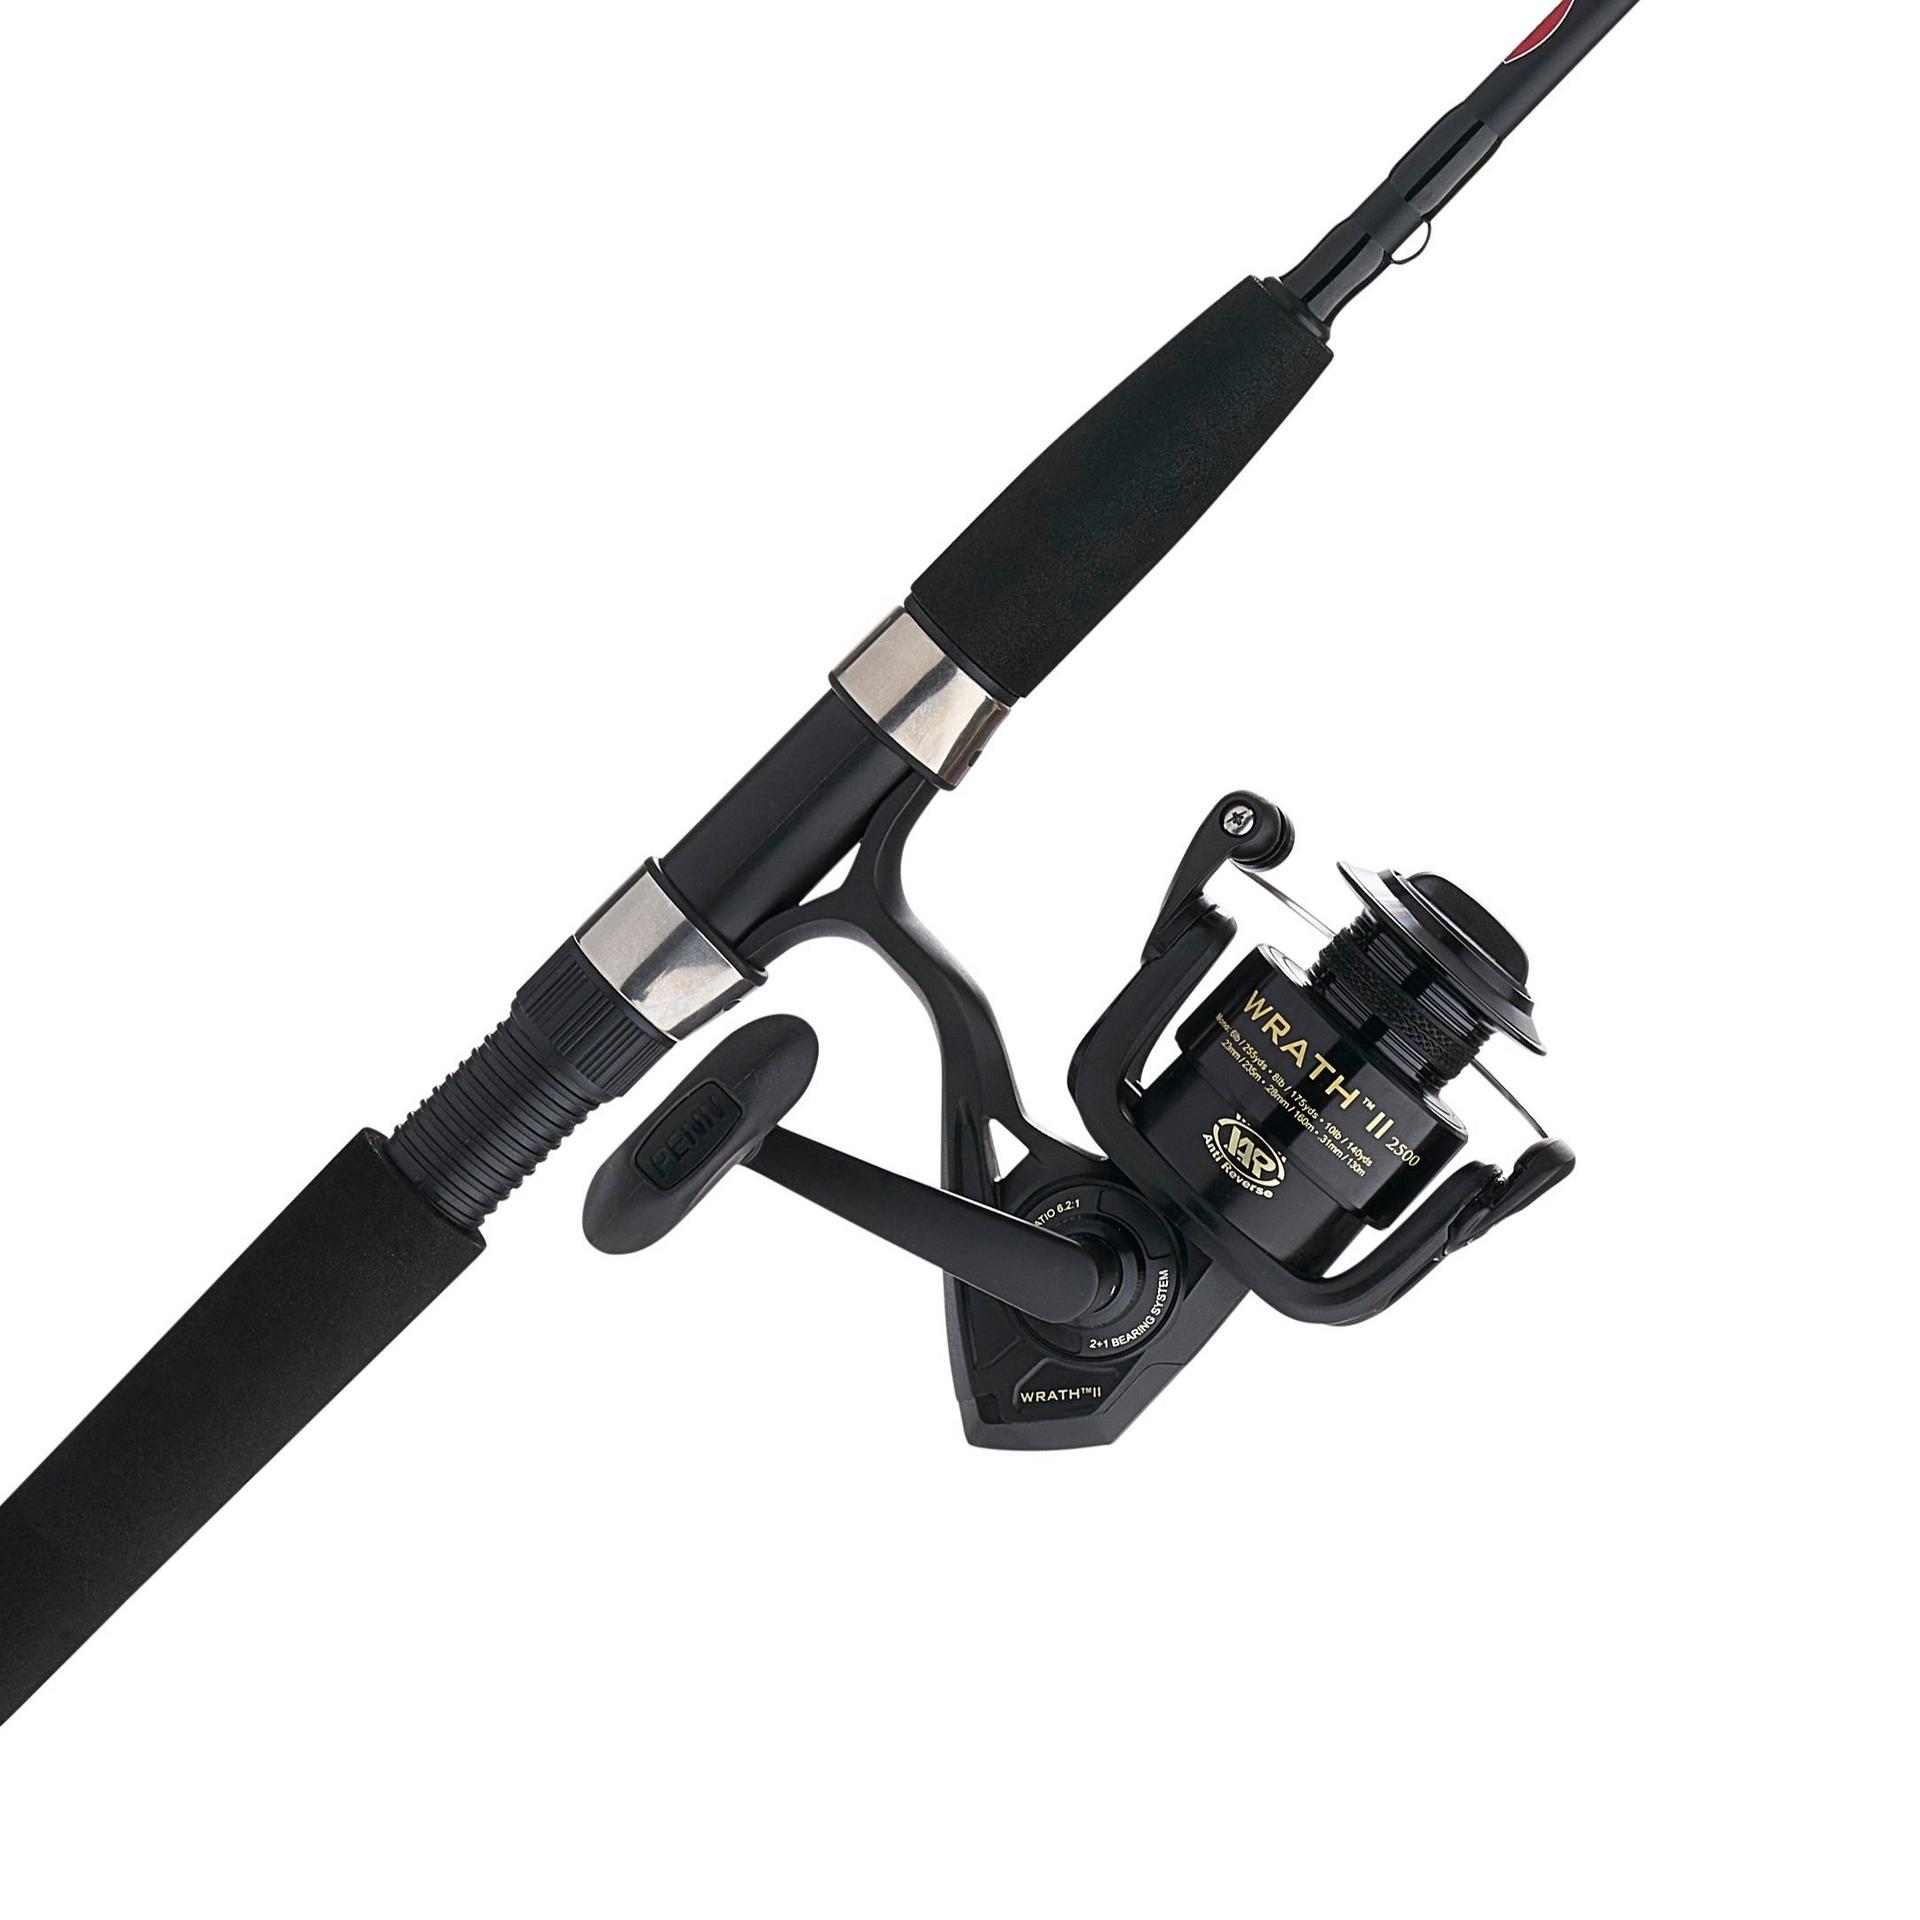 Surf Fishing Rod And Reel Combo, Saltwater Fishing Combo, 12ft Surf Rod  9000 Spinning Reel 9+1 BB, Offshore Sea Fishing Gear Kit Fishing Pole